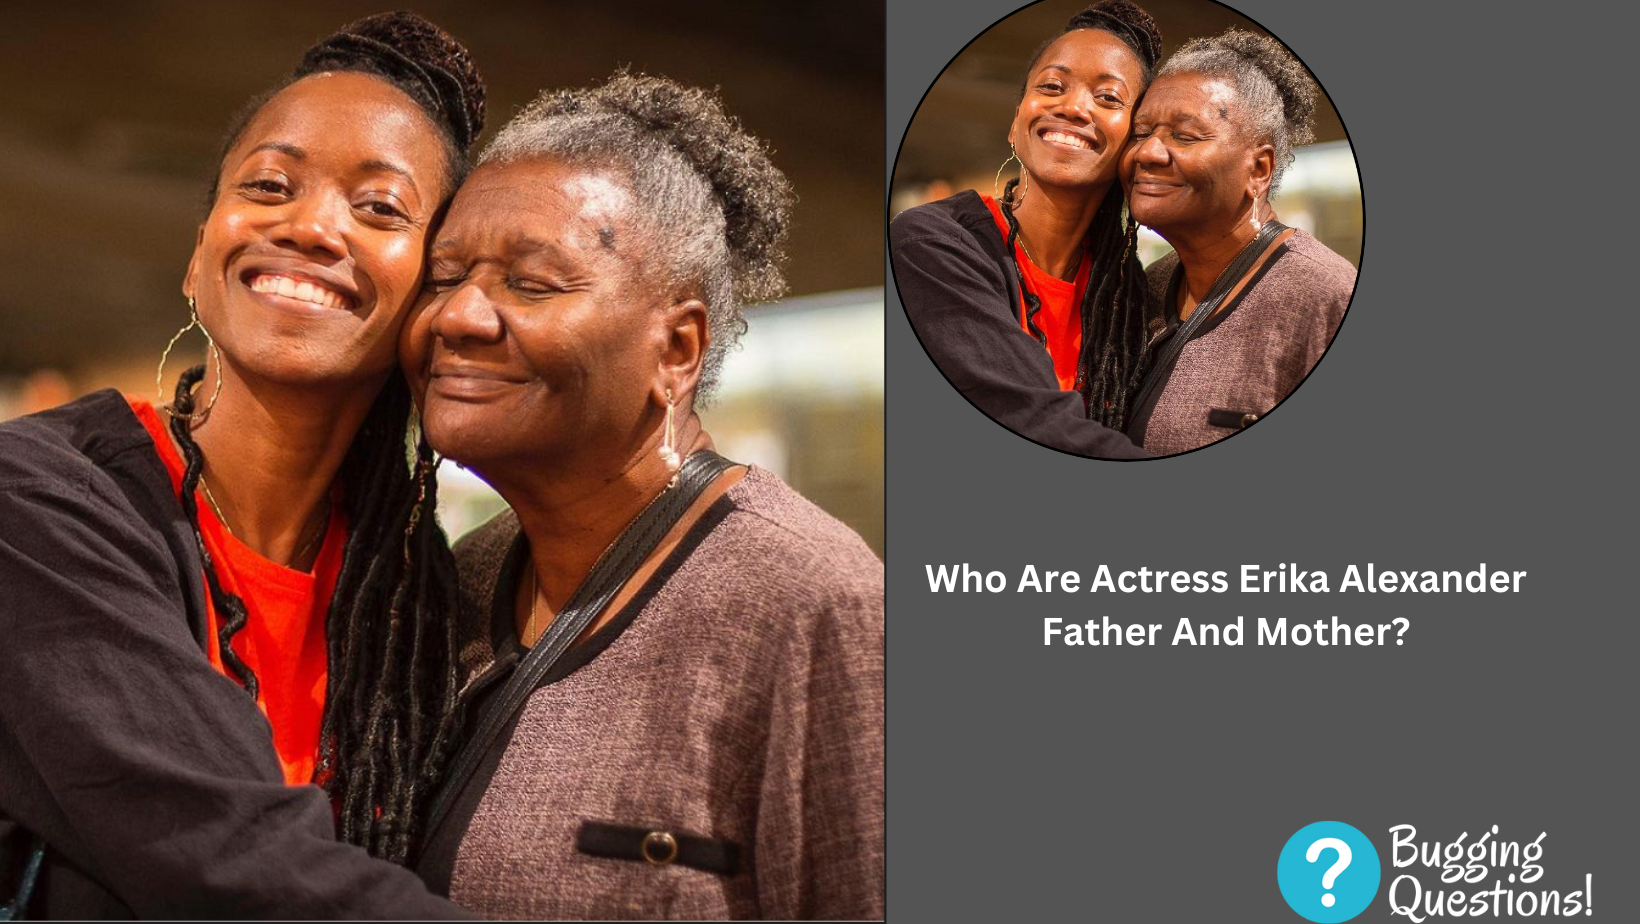 Who Are Actress Erika Alexander Father And Mother?